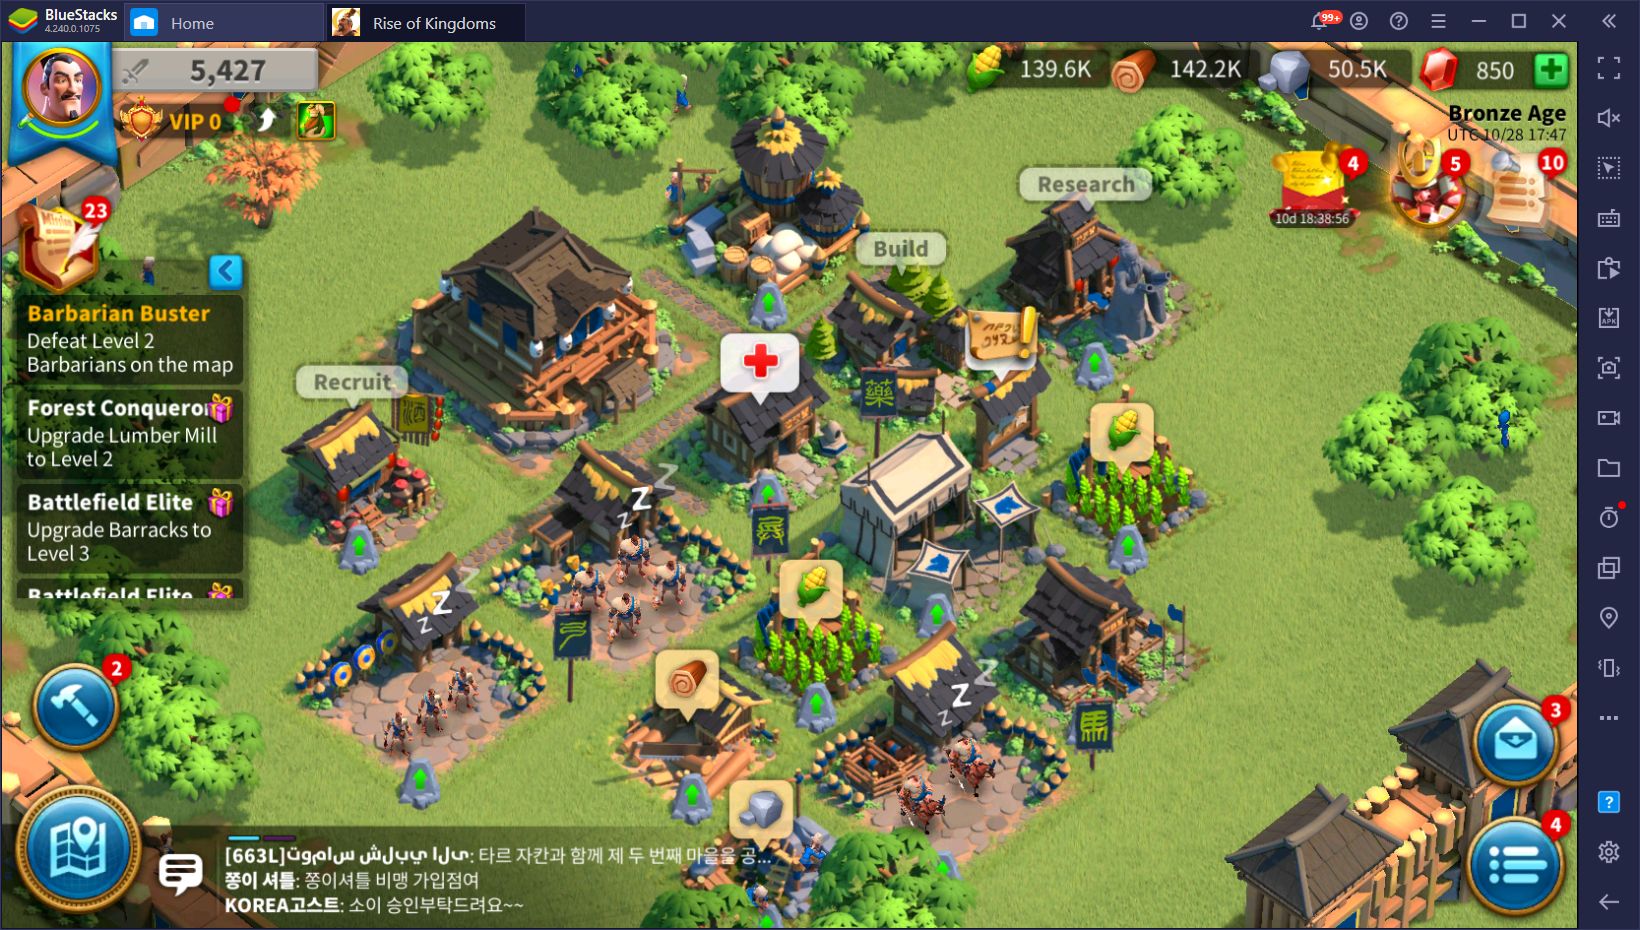 The New BlueStacks Smart Edge Scrolling Feature Will Redefine the Way You Play Rise of Kingdoms on PC